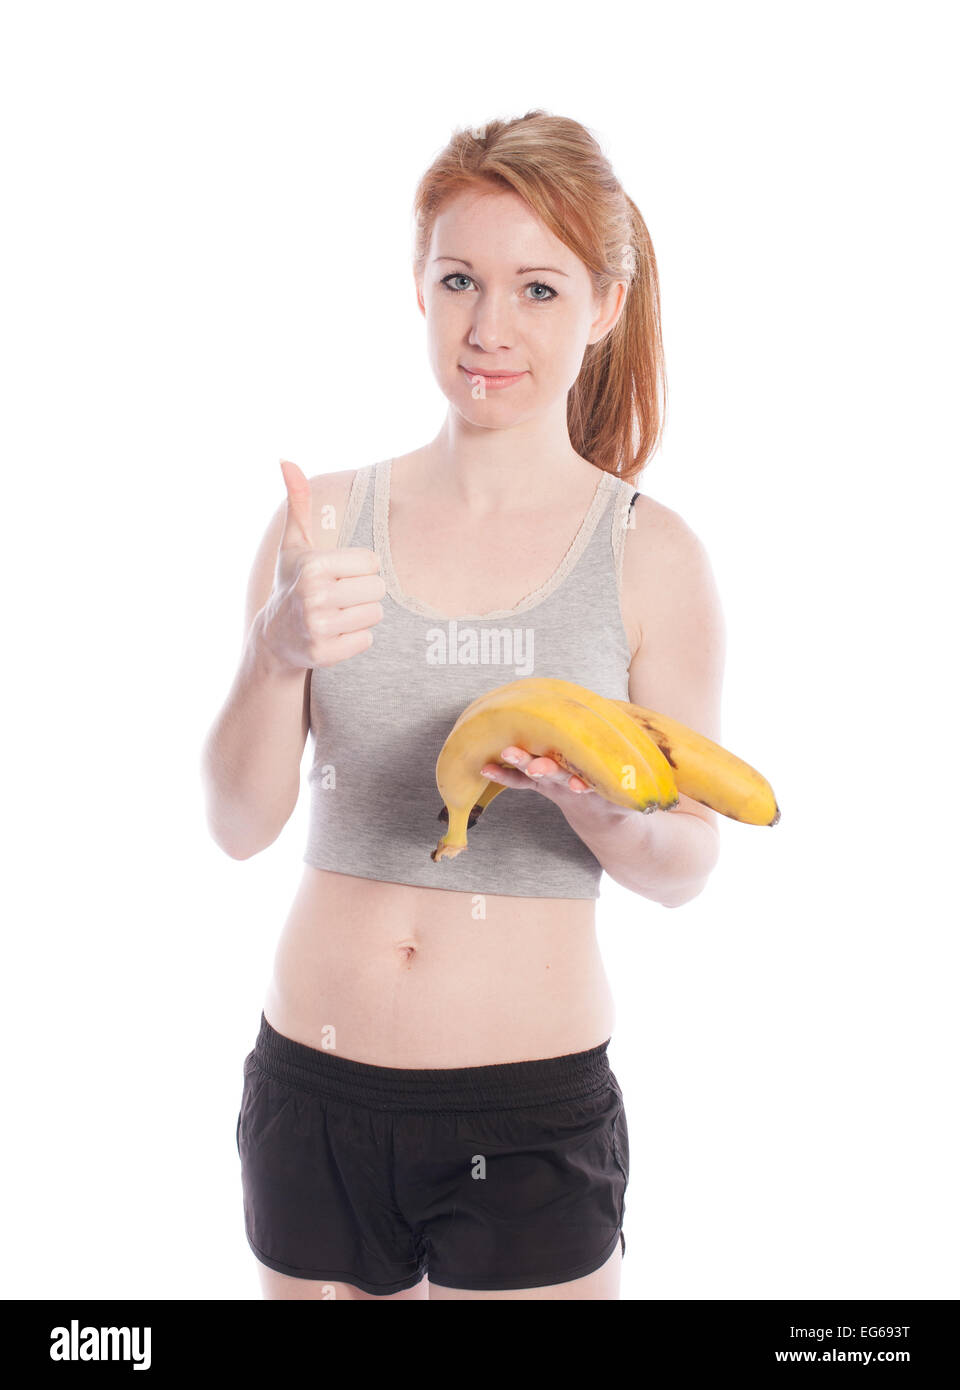 Athletic girl with bananas in hand on white background. Stock Photo